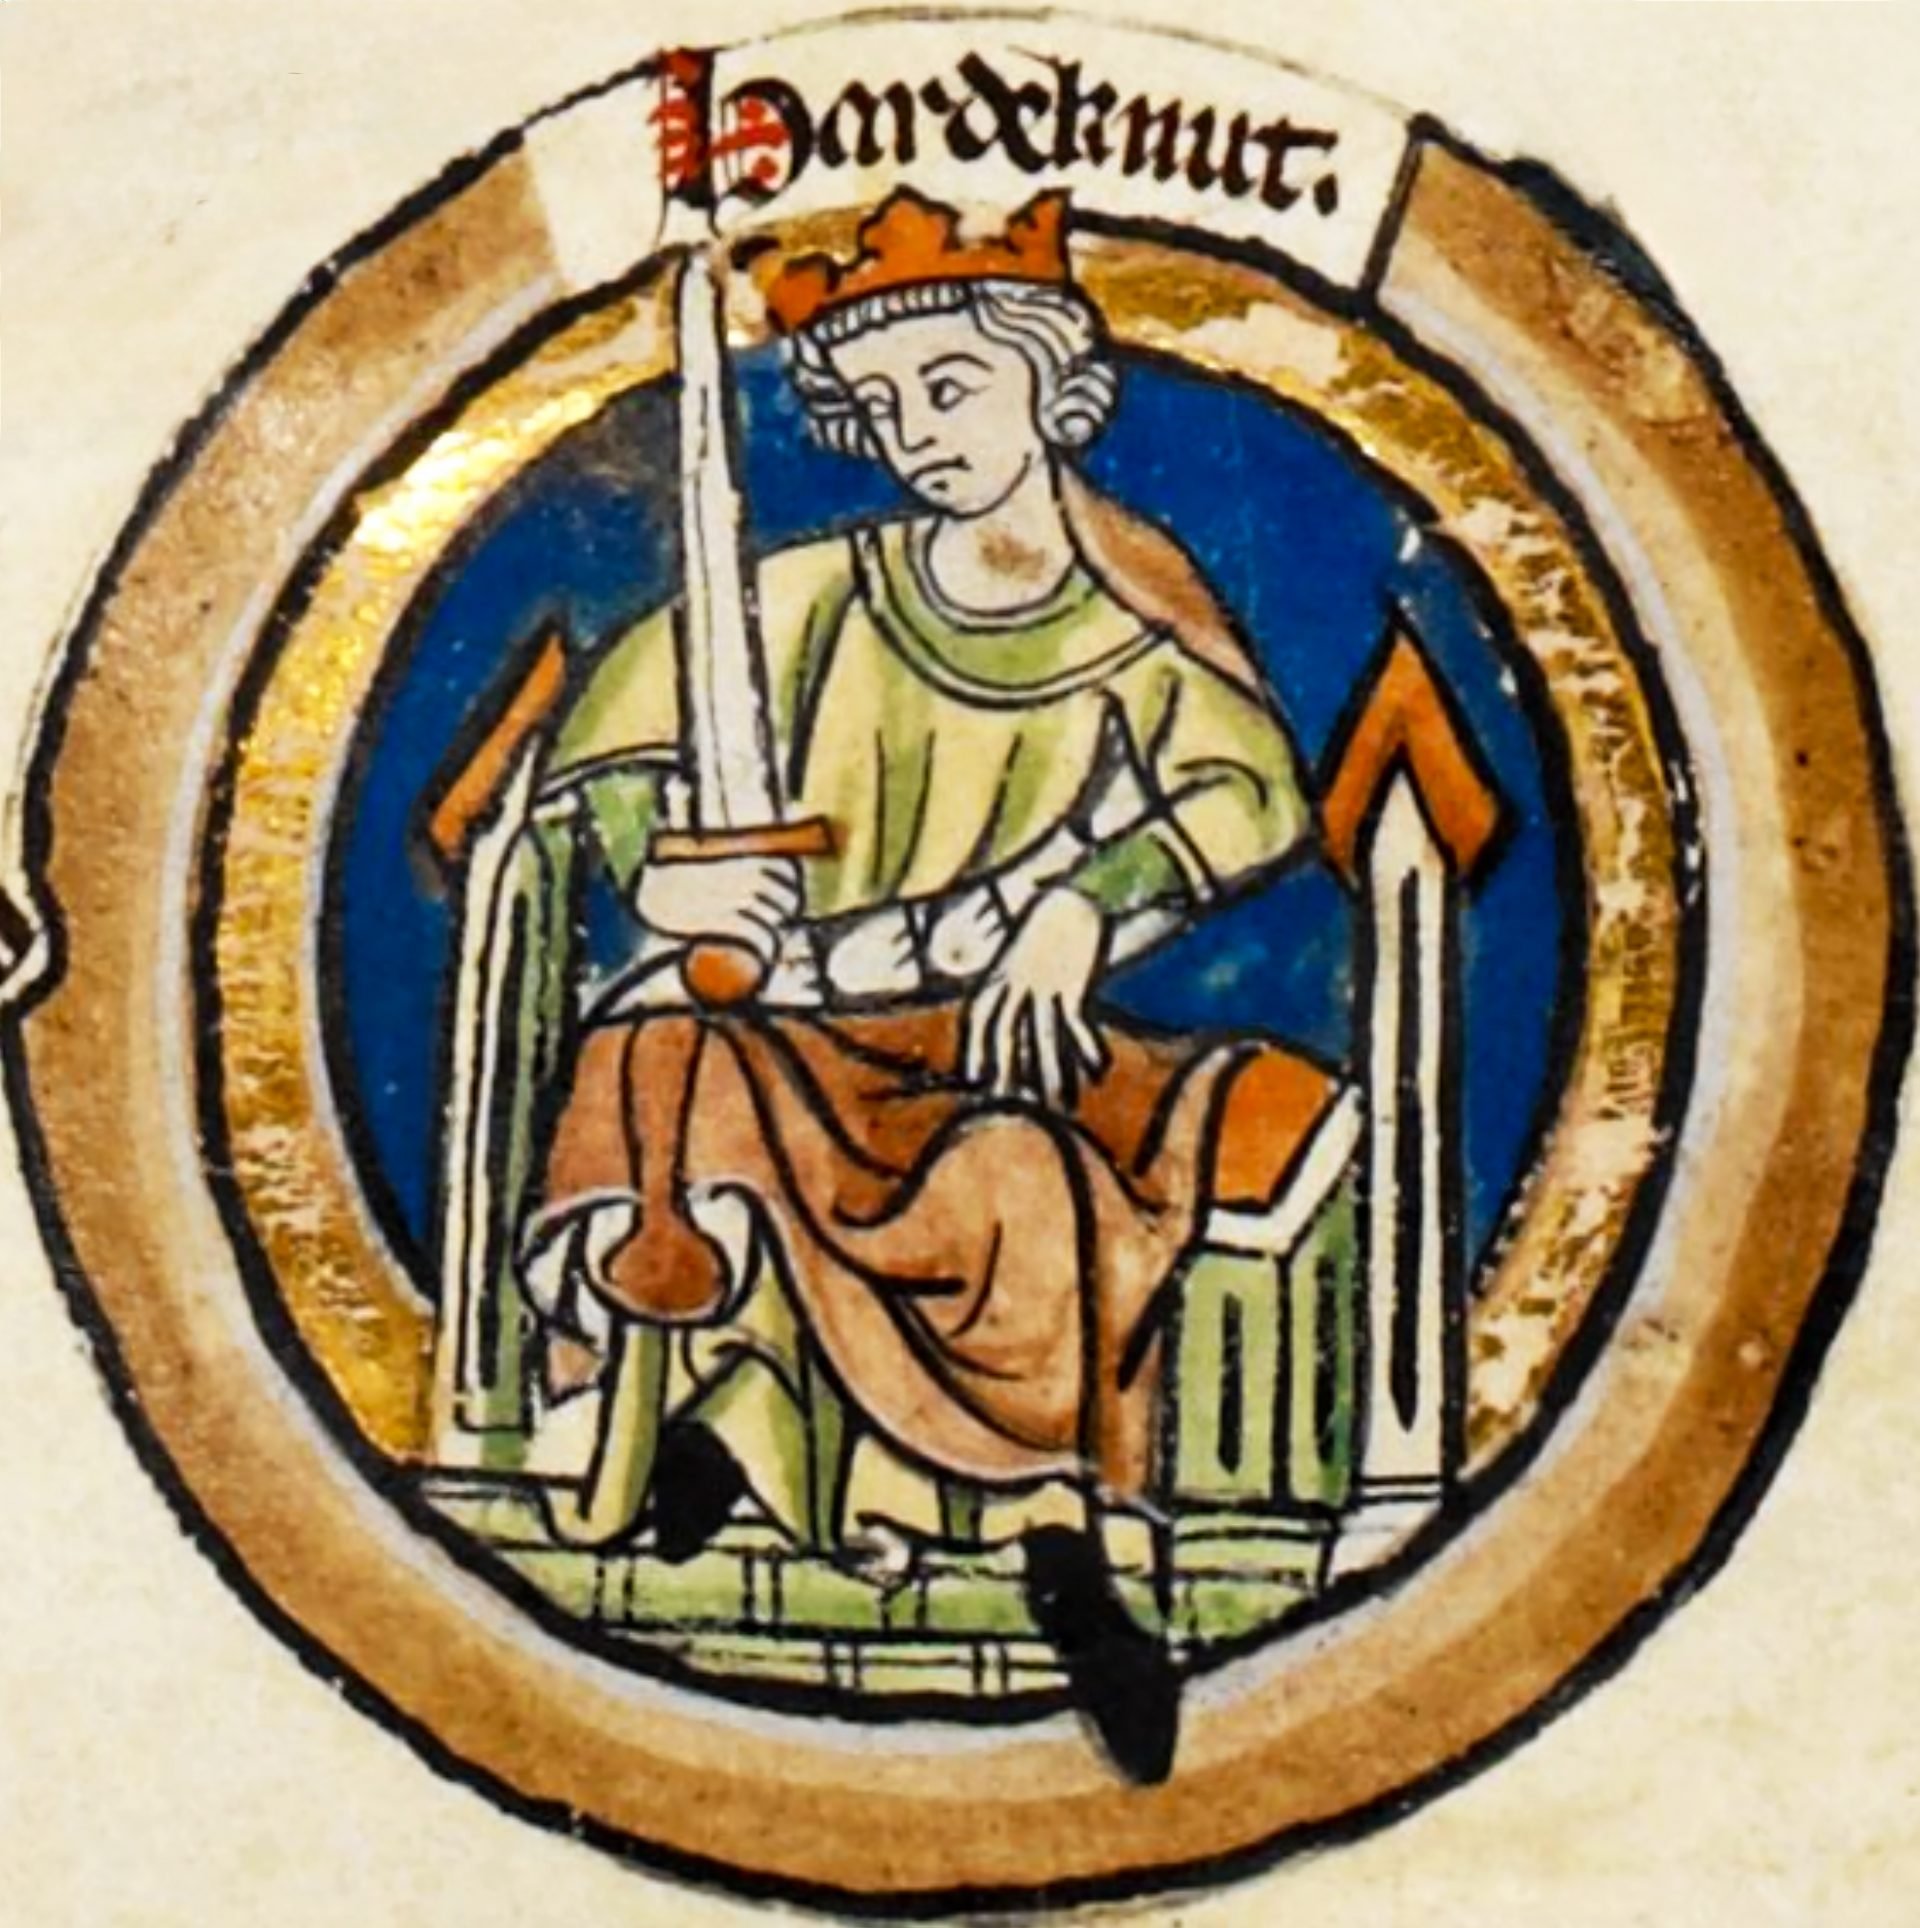 A medieval illustration of king Harthacnut on a throne with a sword in a gold circular frame.